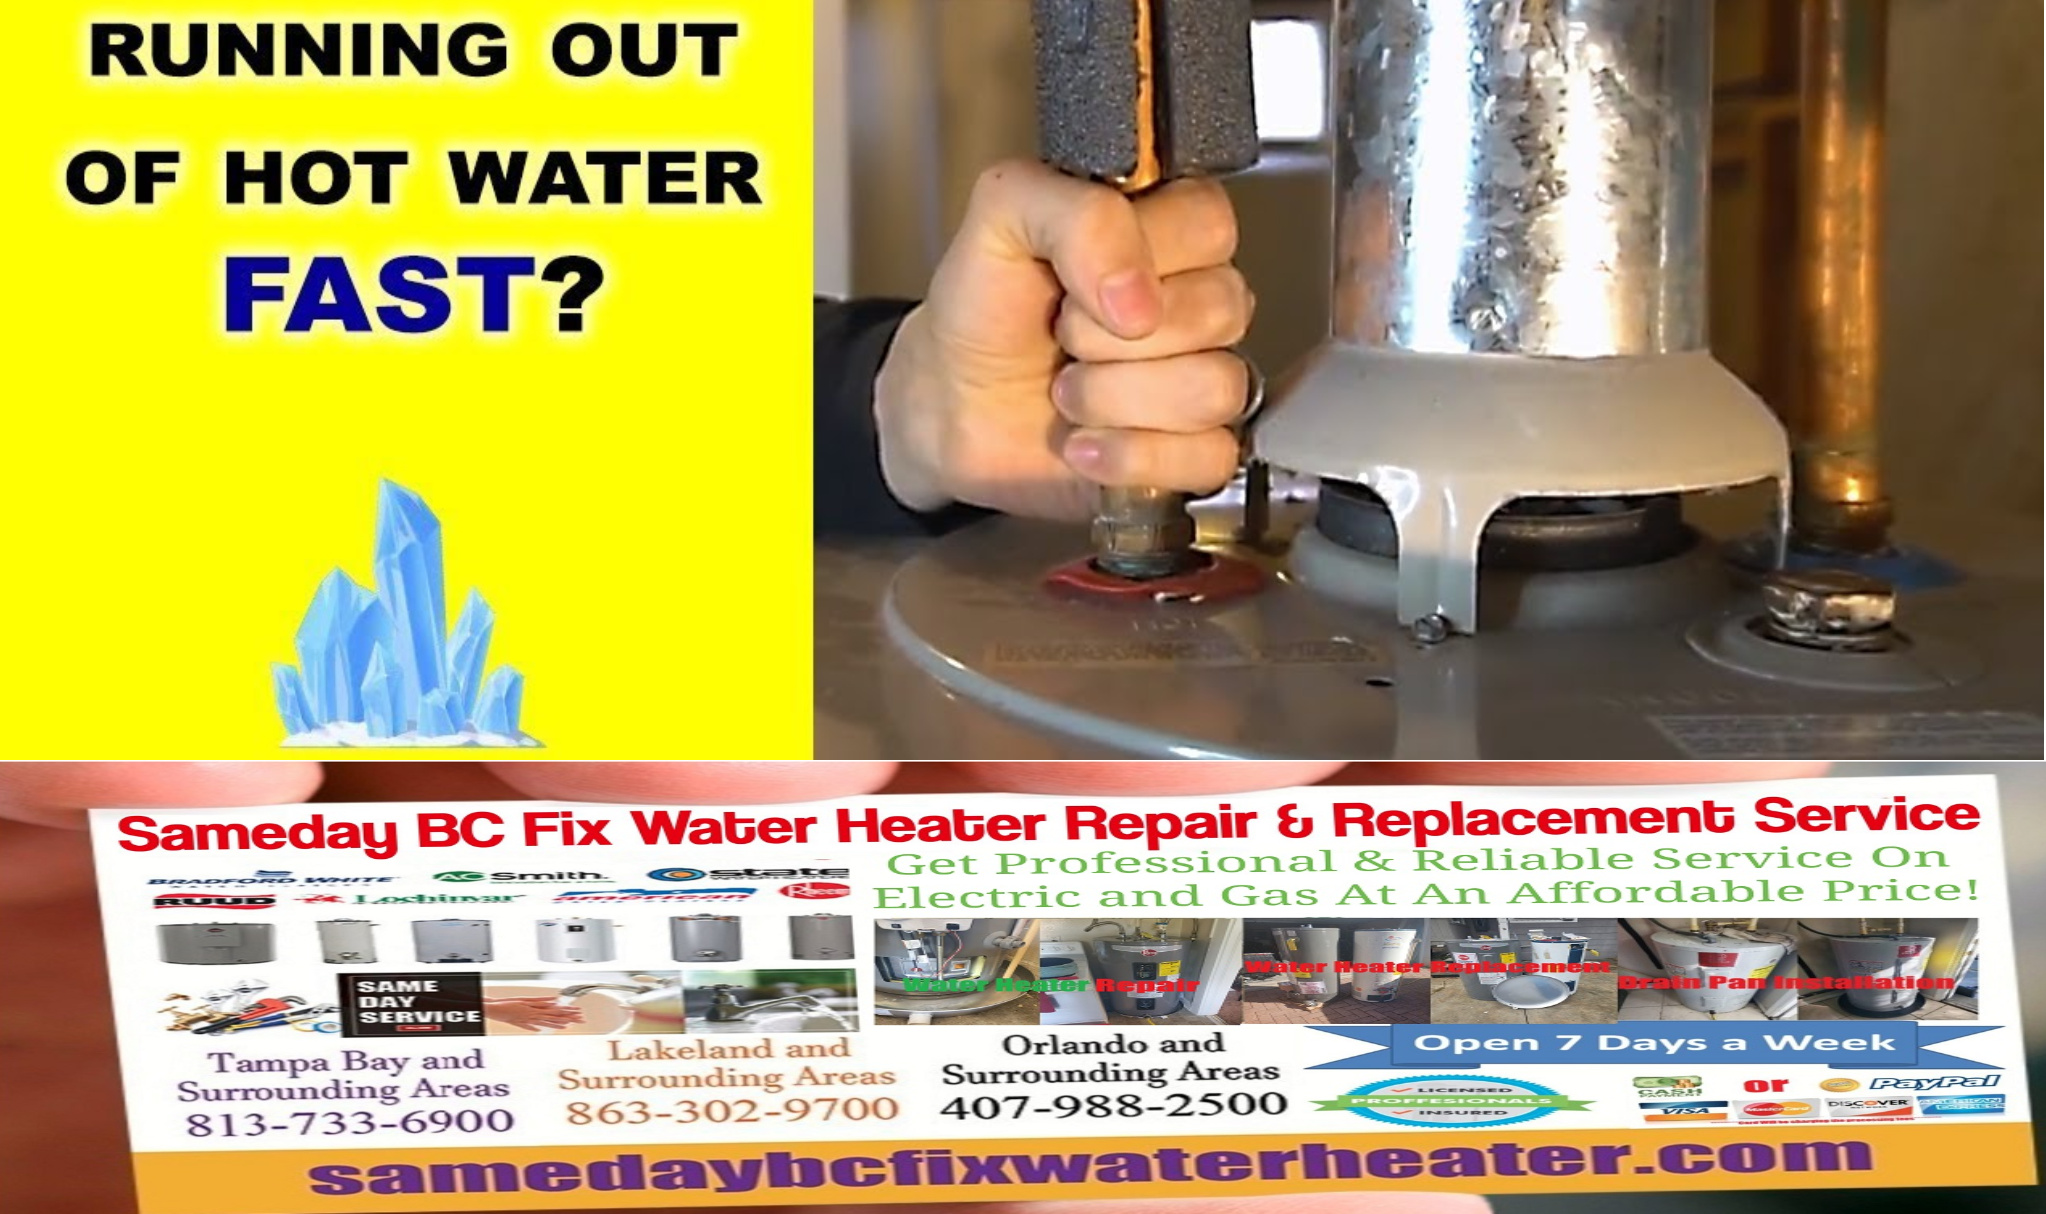 Why Do I Run Out of Hot Water So Quickly 4 Reasons You're Out of Hot Water Running Out Quickly Water Heater Repair, Replacement, Installation Service Near Me